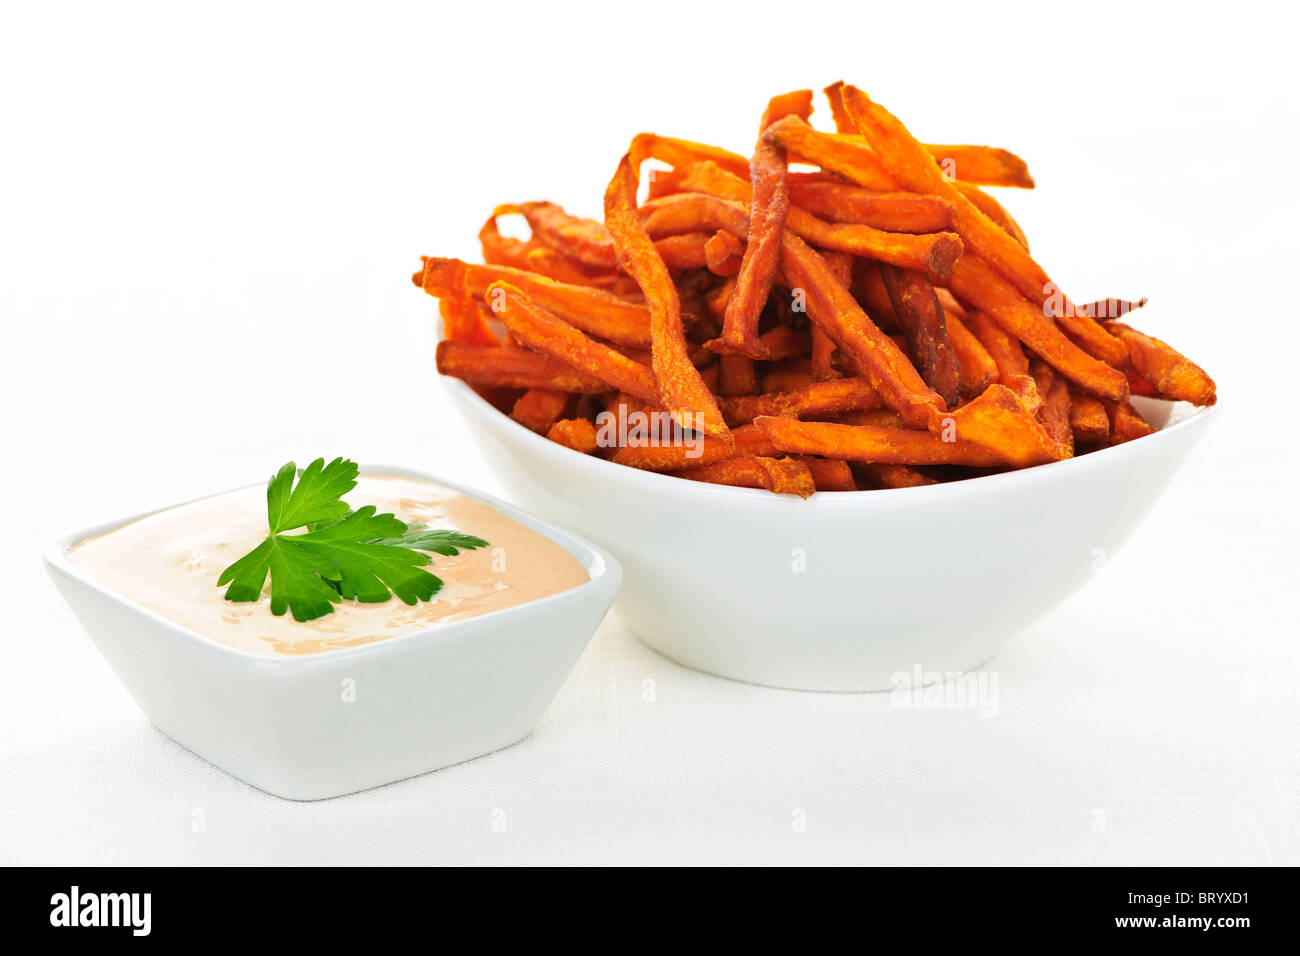 Bowl of sweet potato or yam fries with dipping sauce Stock Photo